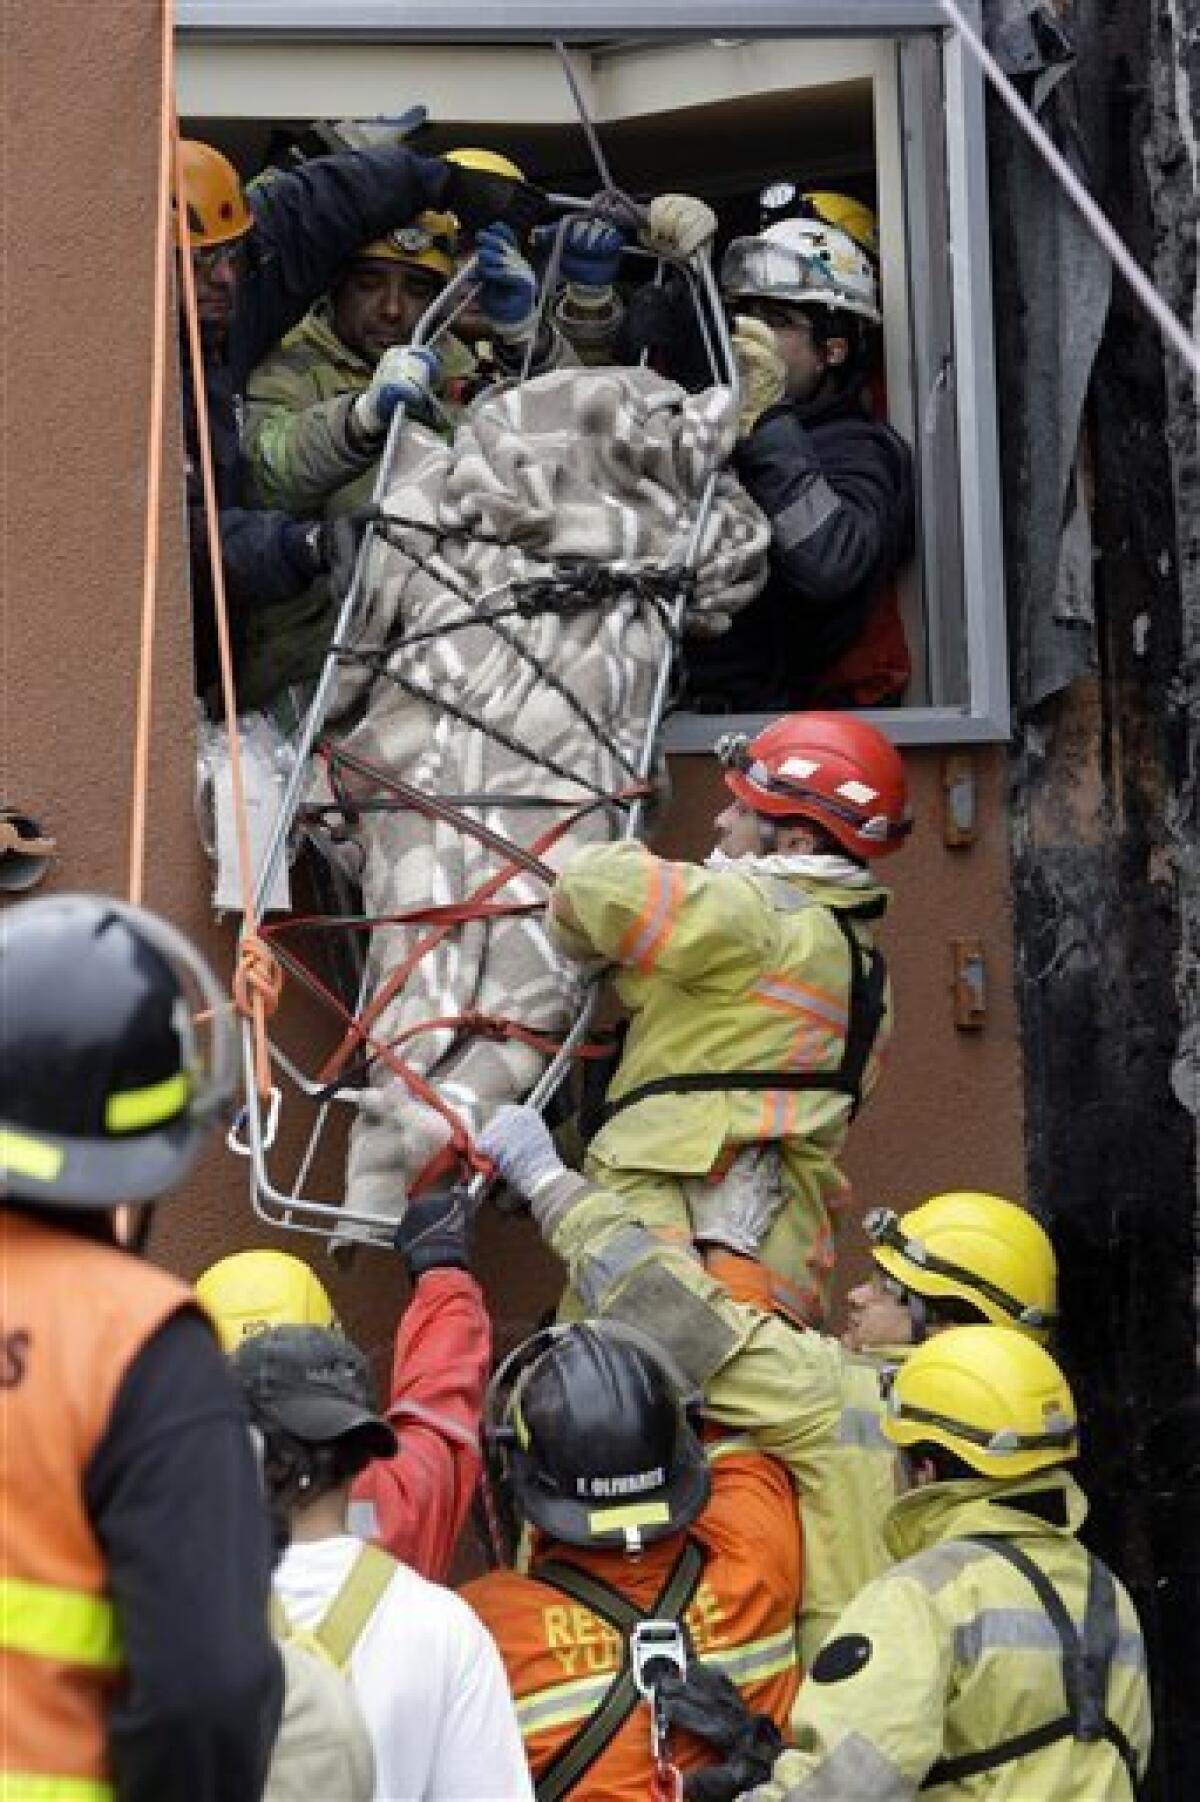 Rescue workers recover the body of an earthquake victim from a collapsed building in Concepcion, Chile, Sunday, Feb. 28, 2010. A 8.8-magnitude earthquake hit Chile early Saturday. (AP Photo/ Aliosha Marquez)